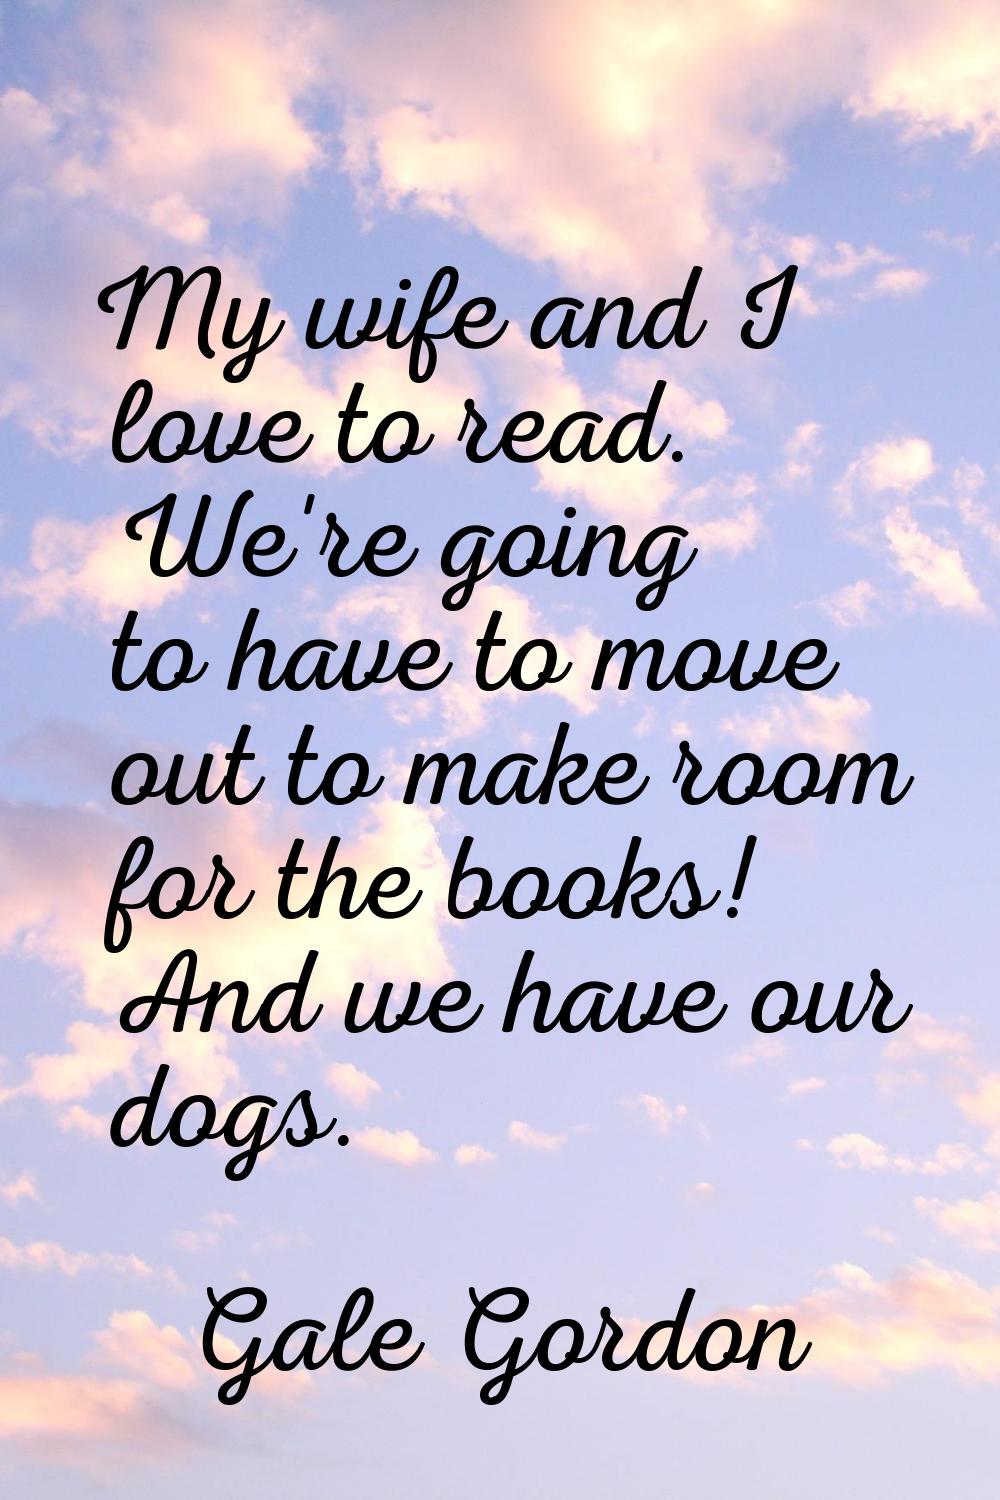 My wife and I love to read. We're going to have to move out to make room for the books! And we have